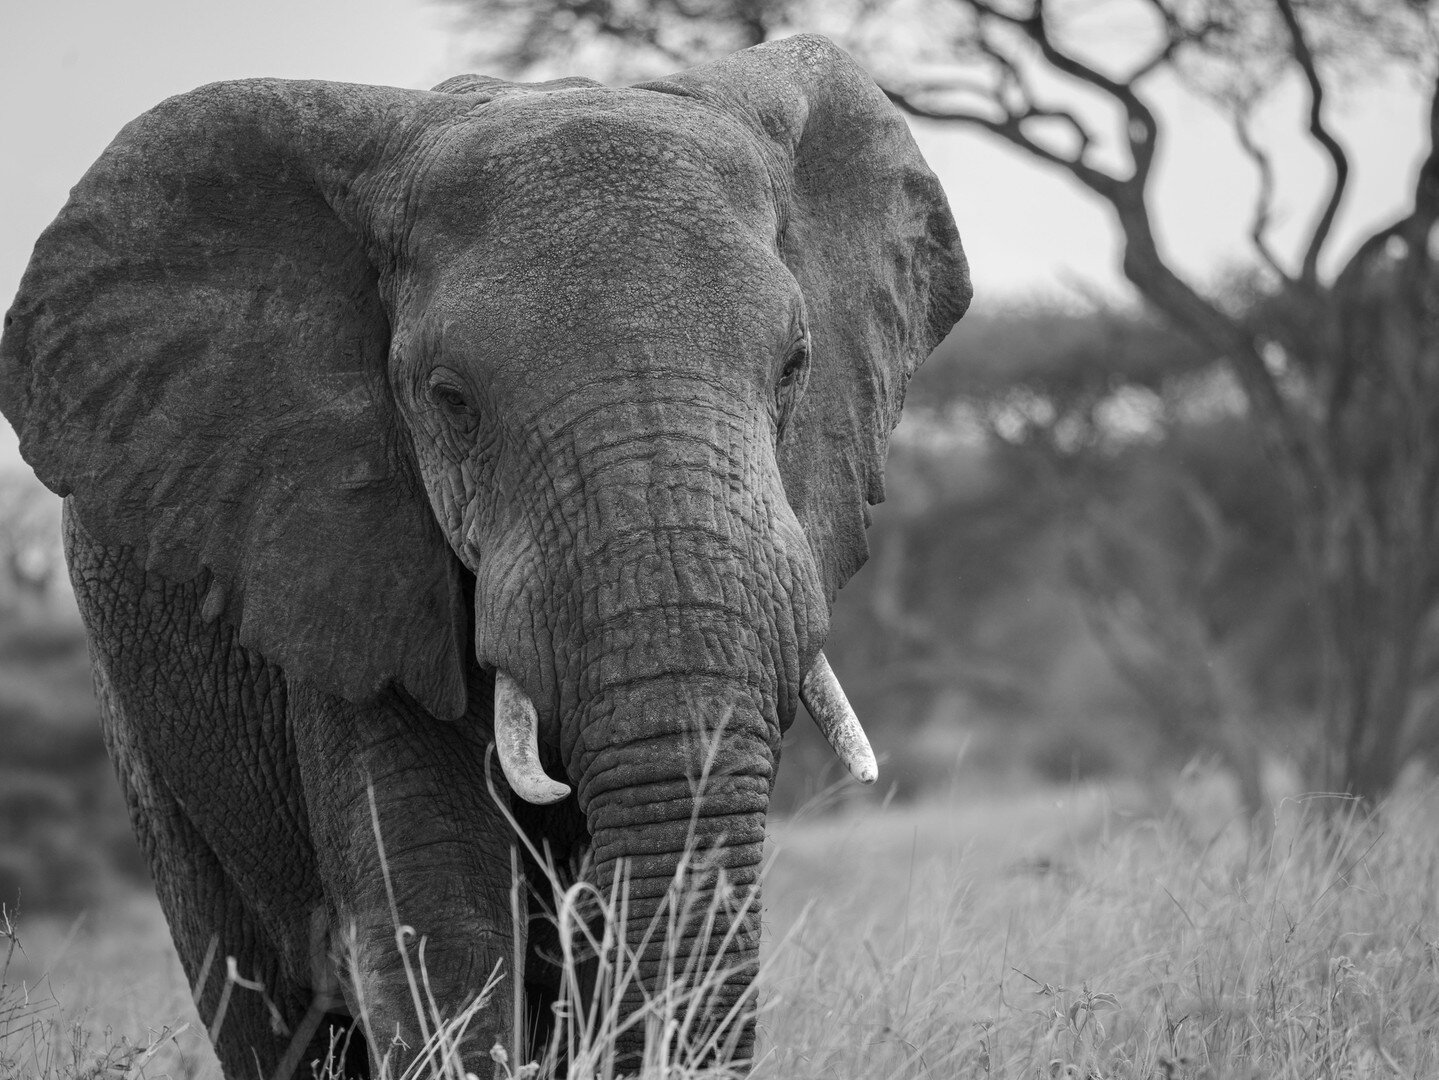 This shot was taken in the #serengeti . Elephants always have the kindest eyes. They seem wise, like they know things in life. Warm, giant but gentle. There's 100% an intelligence there that really connects with you when you see them up close. It was